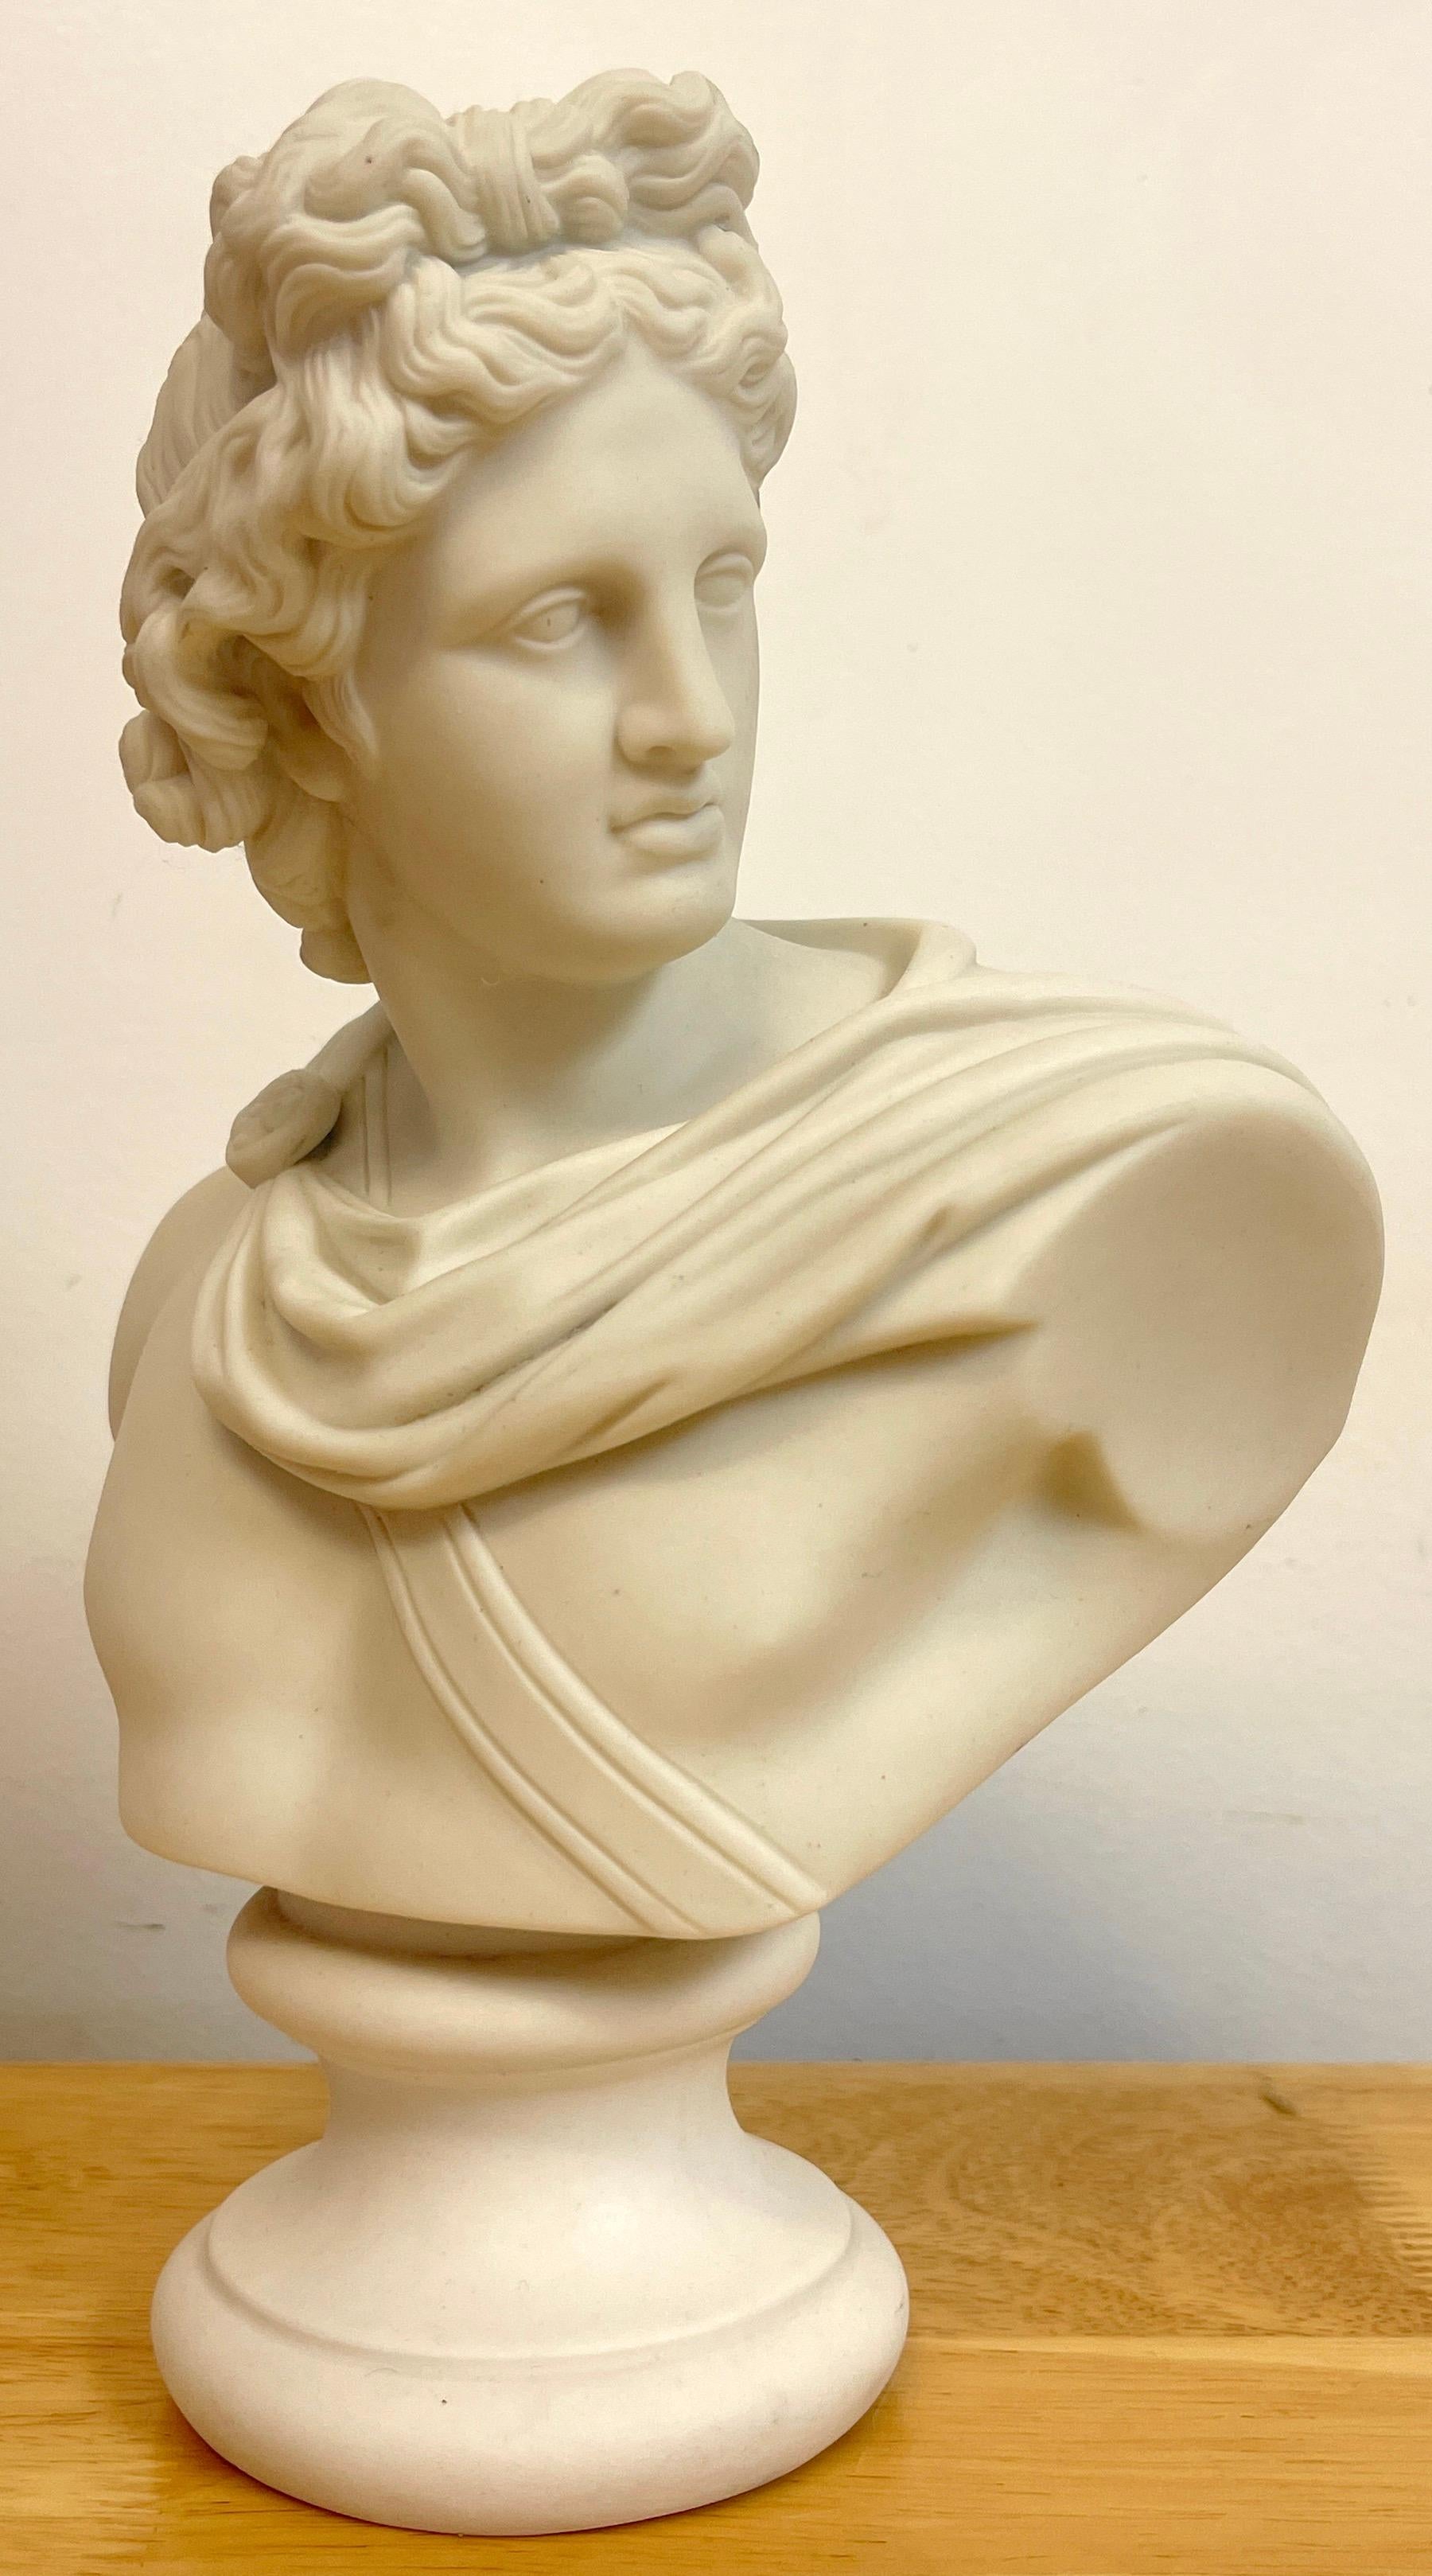 19th century English diminutive Parian bust of apollo Belvedere, a well executed example, raised on a 3-inch diameter solace base. Unmarked.